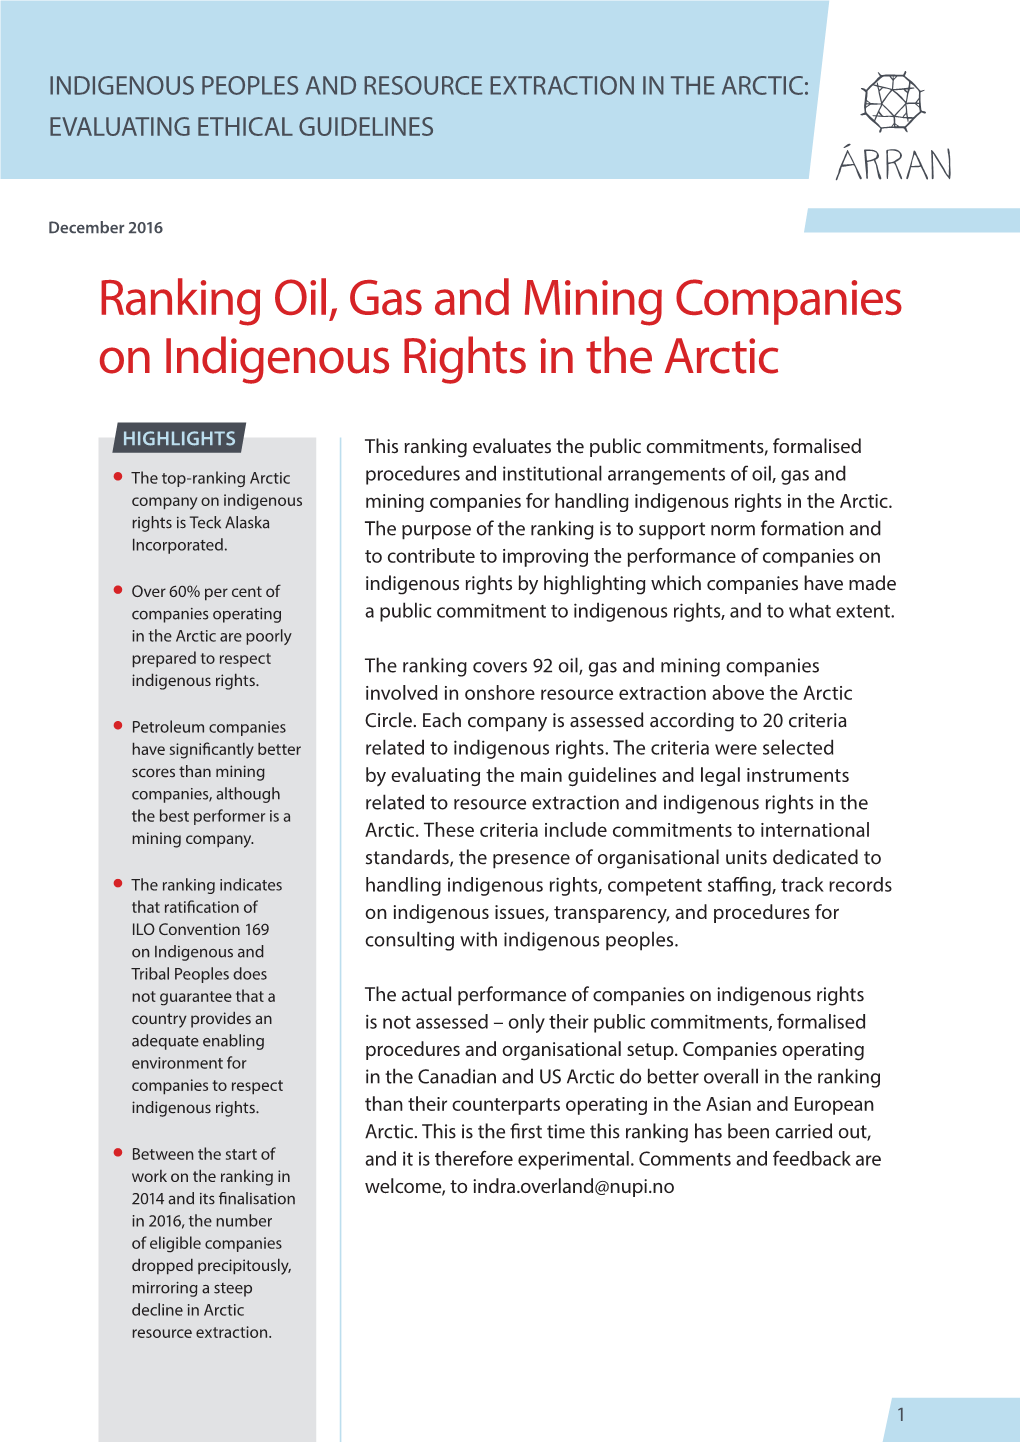 Ranking Oil, Gas and Mining Companies on Indigenous Rights in the Arctic